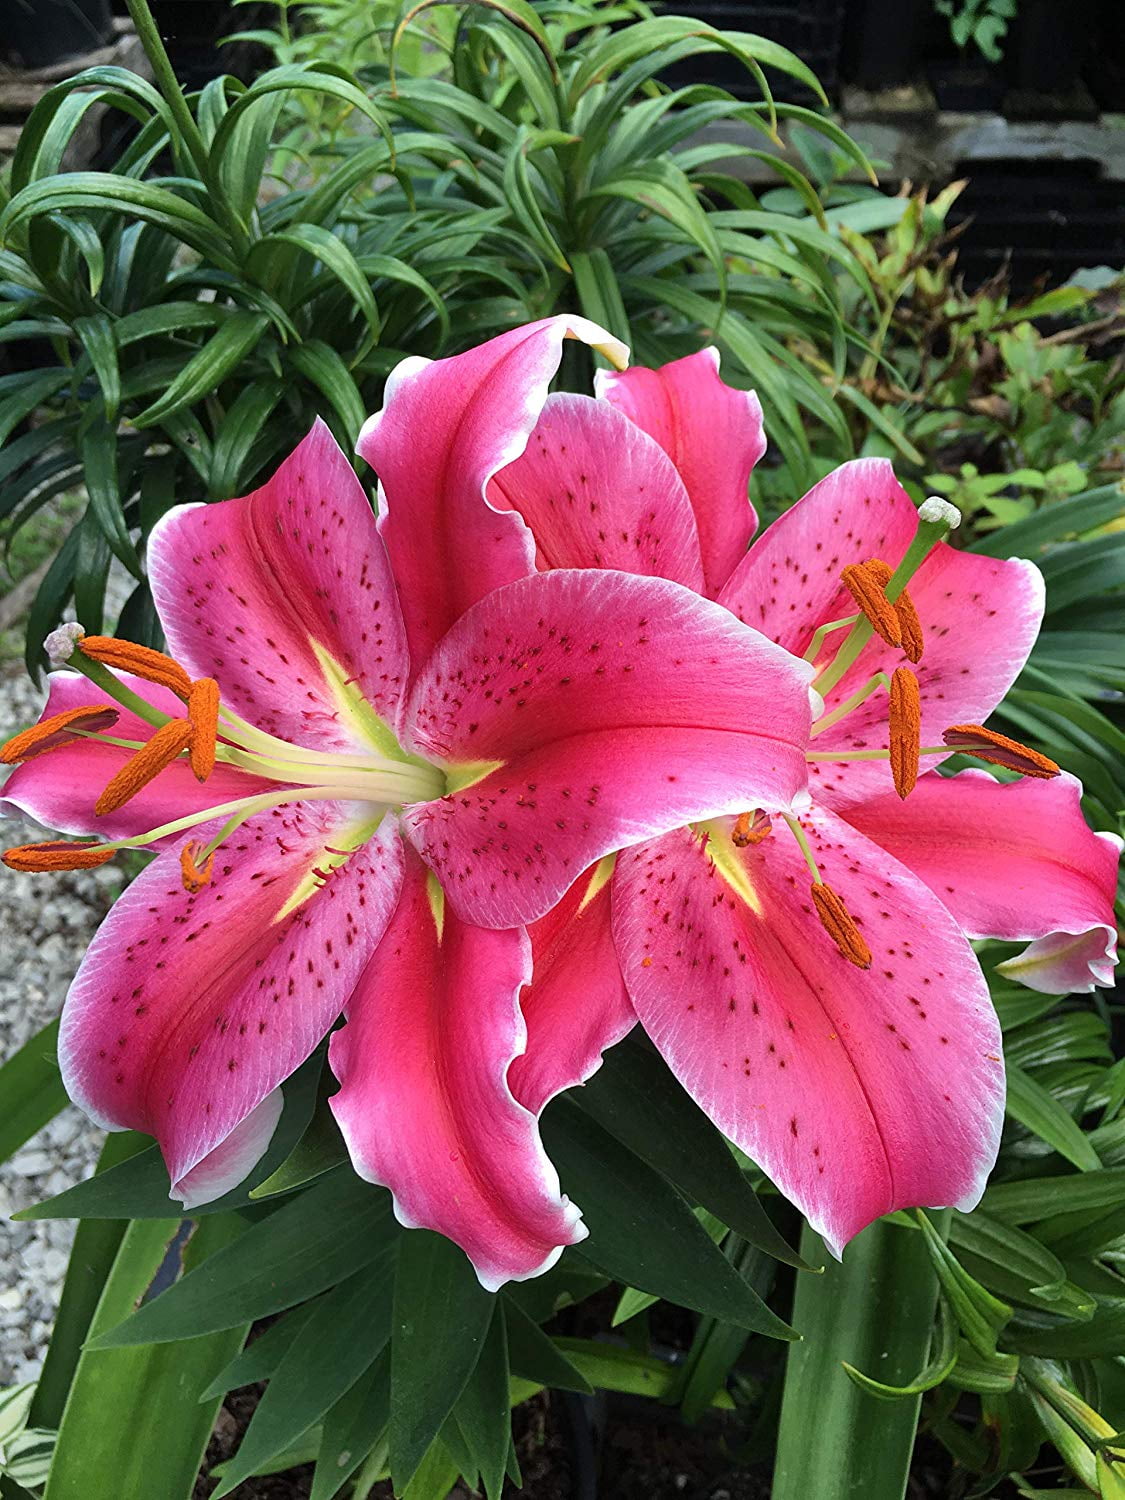 star gazer lily picture